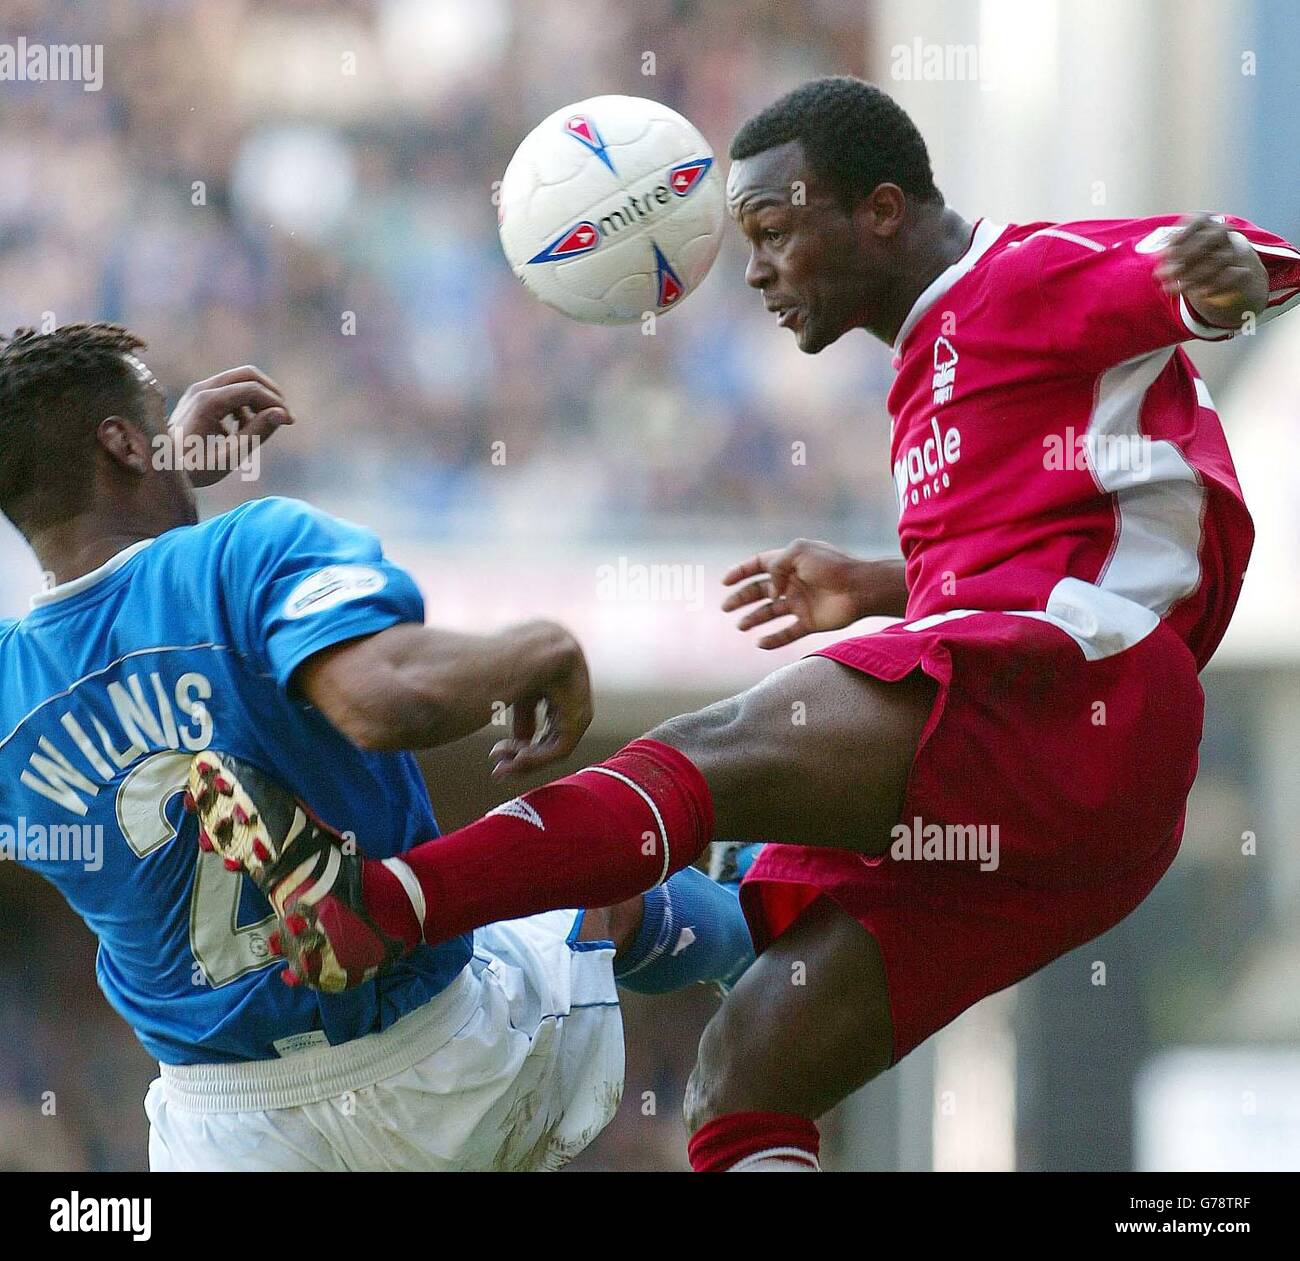 Ipswich Town's Fabian Wilnis and Nottingham Forest's David Johnson challenge in the air for the ball, during their Nationwide Division One match at Ipswich's Portman Road ground. . Stock Photo